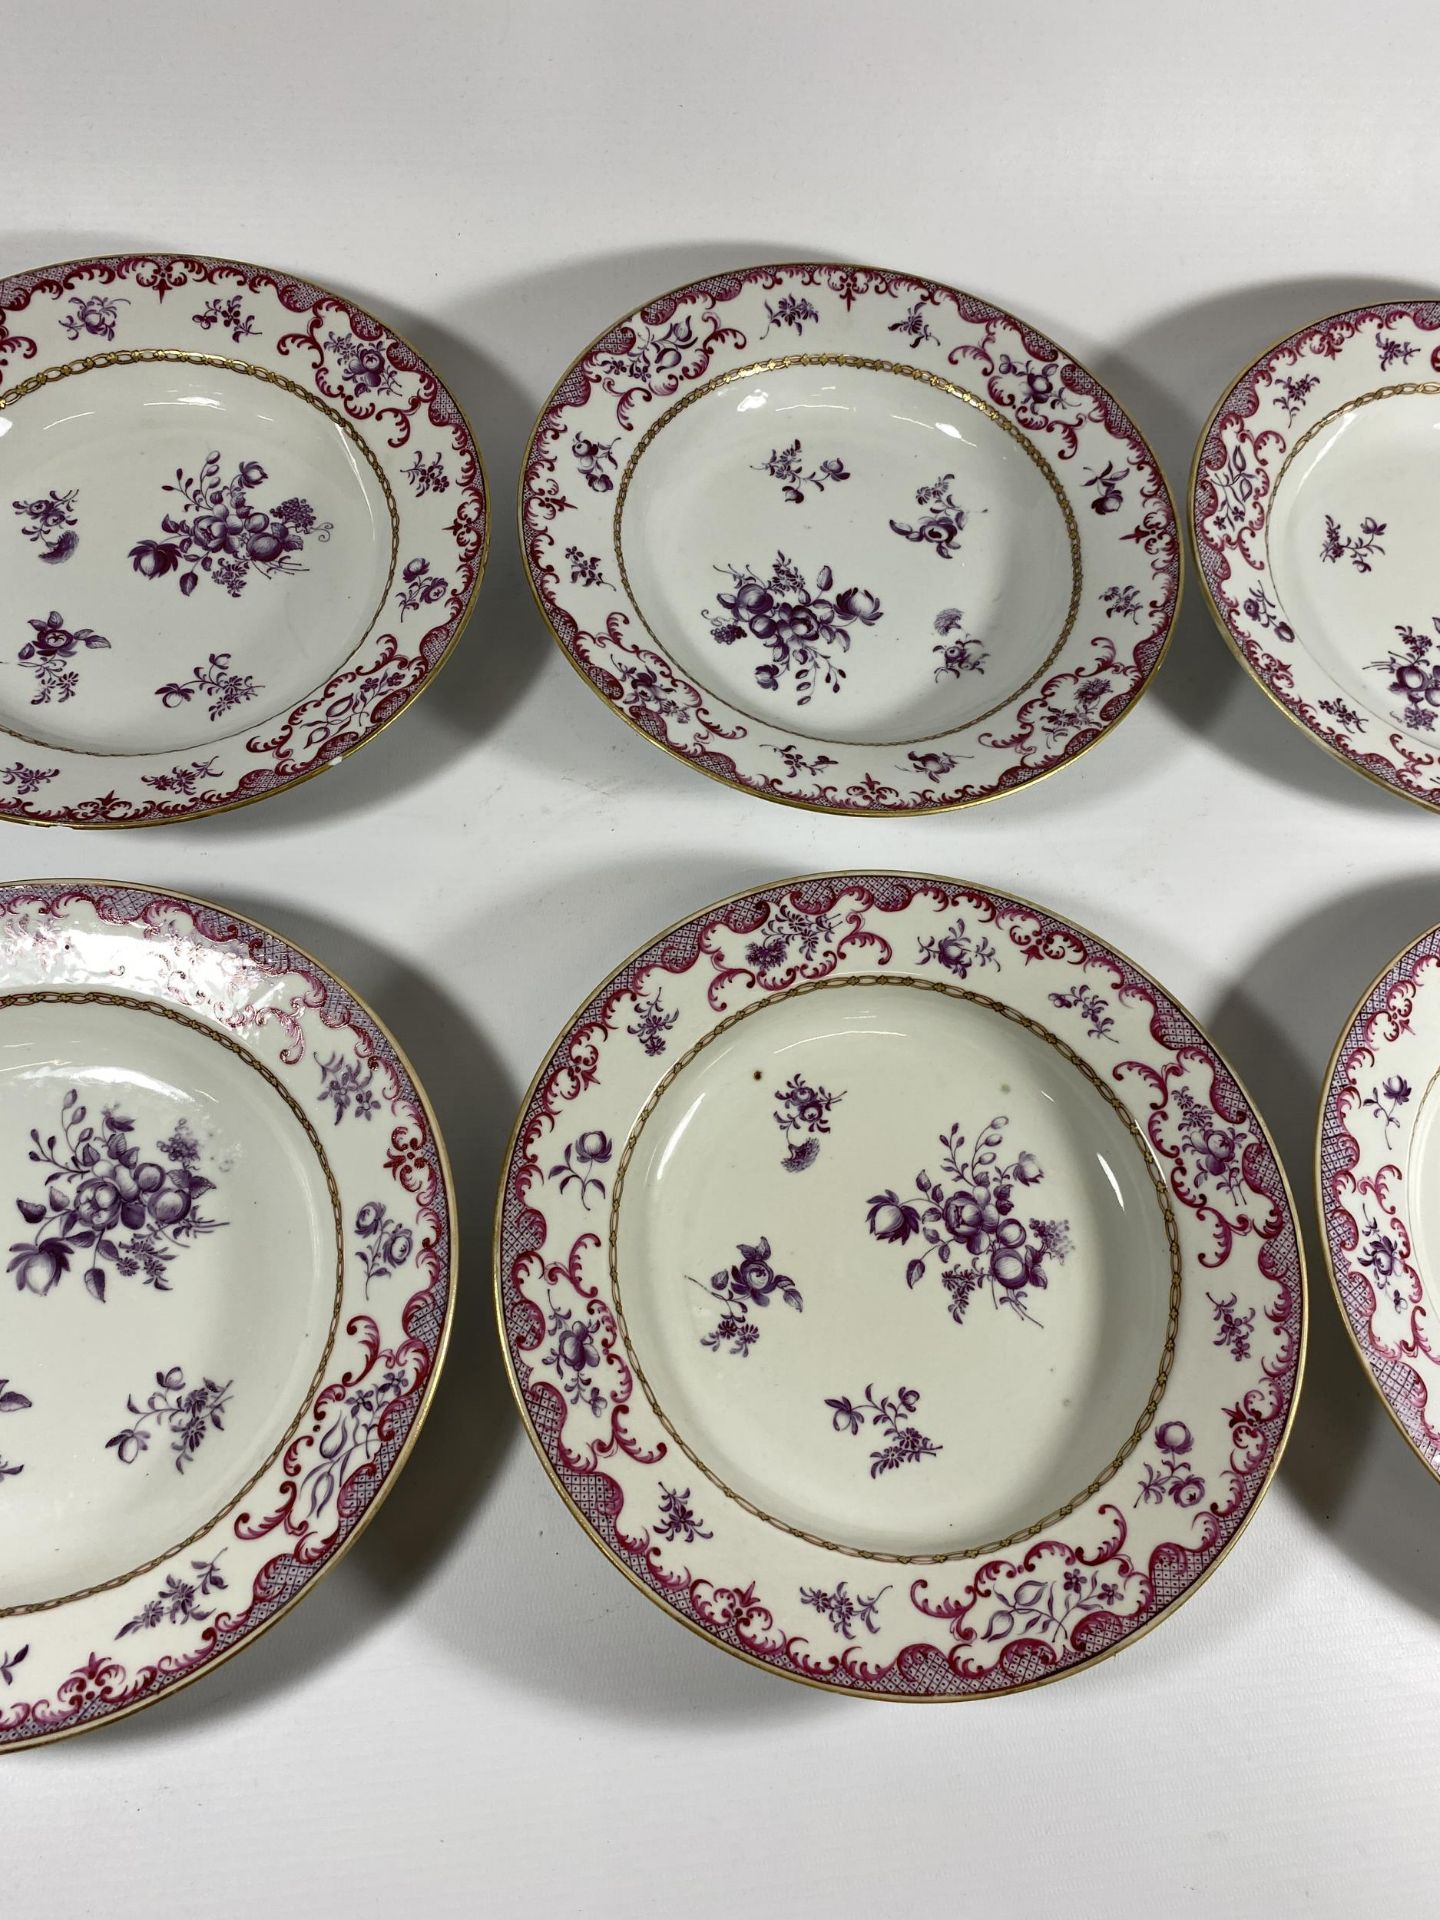 A SET OF SIX EARLY-MID 19TH CENTURY PORCELAIN HAND PAINTED DISHES, UNMARKED, DIAMETER 23CM - Image 3 of 5